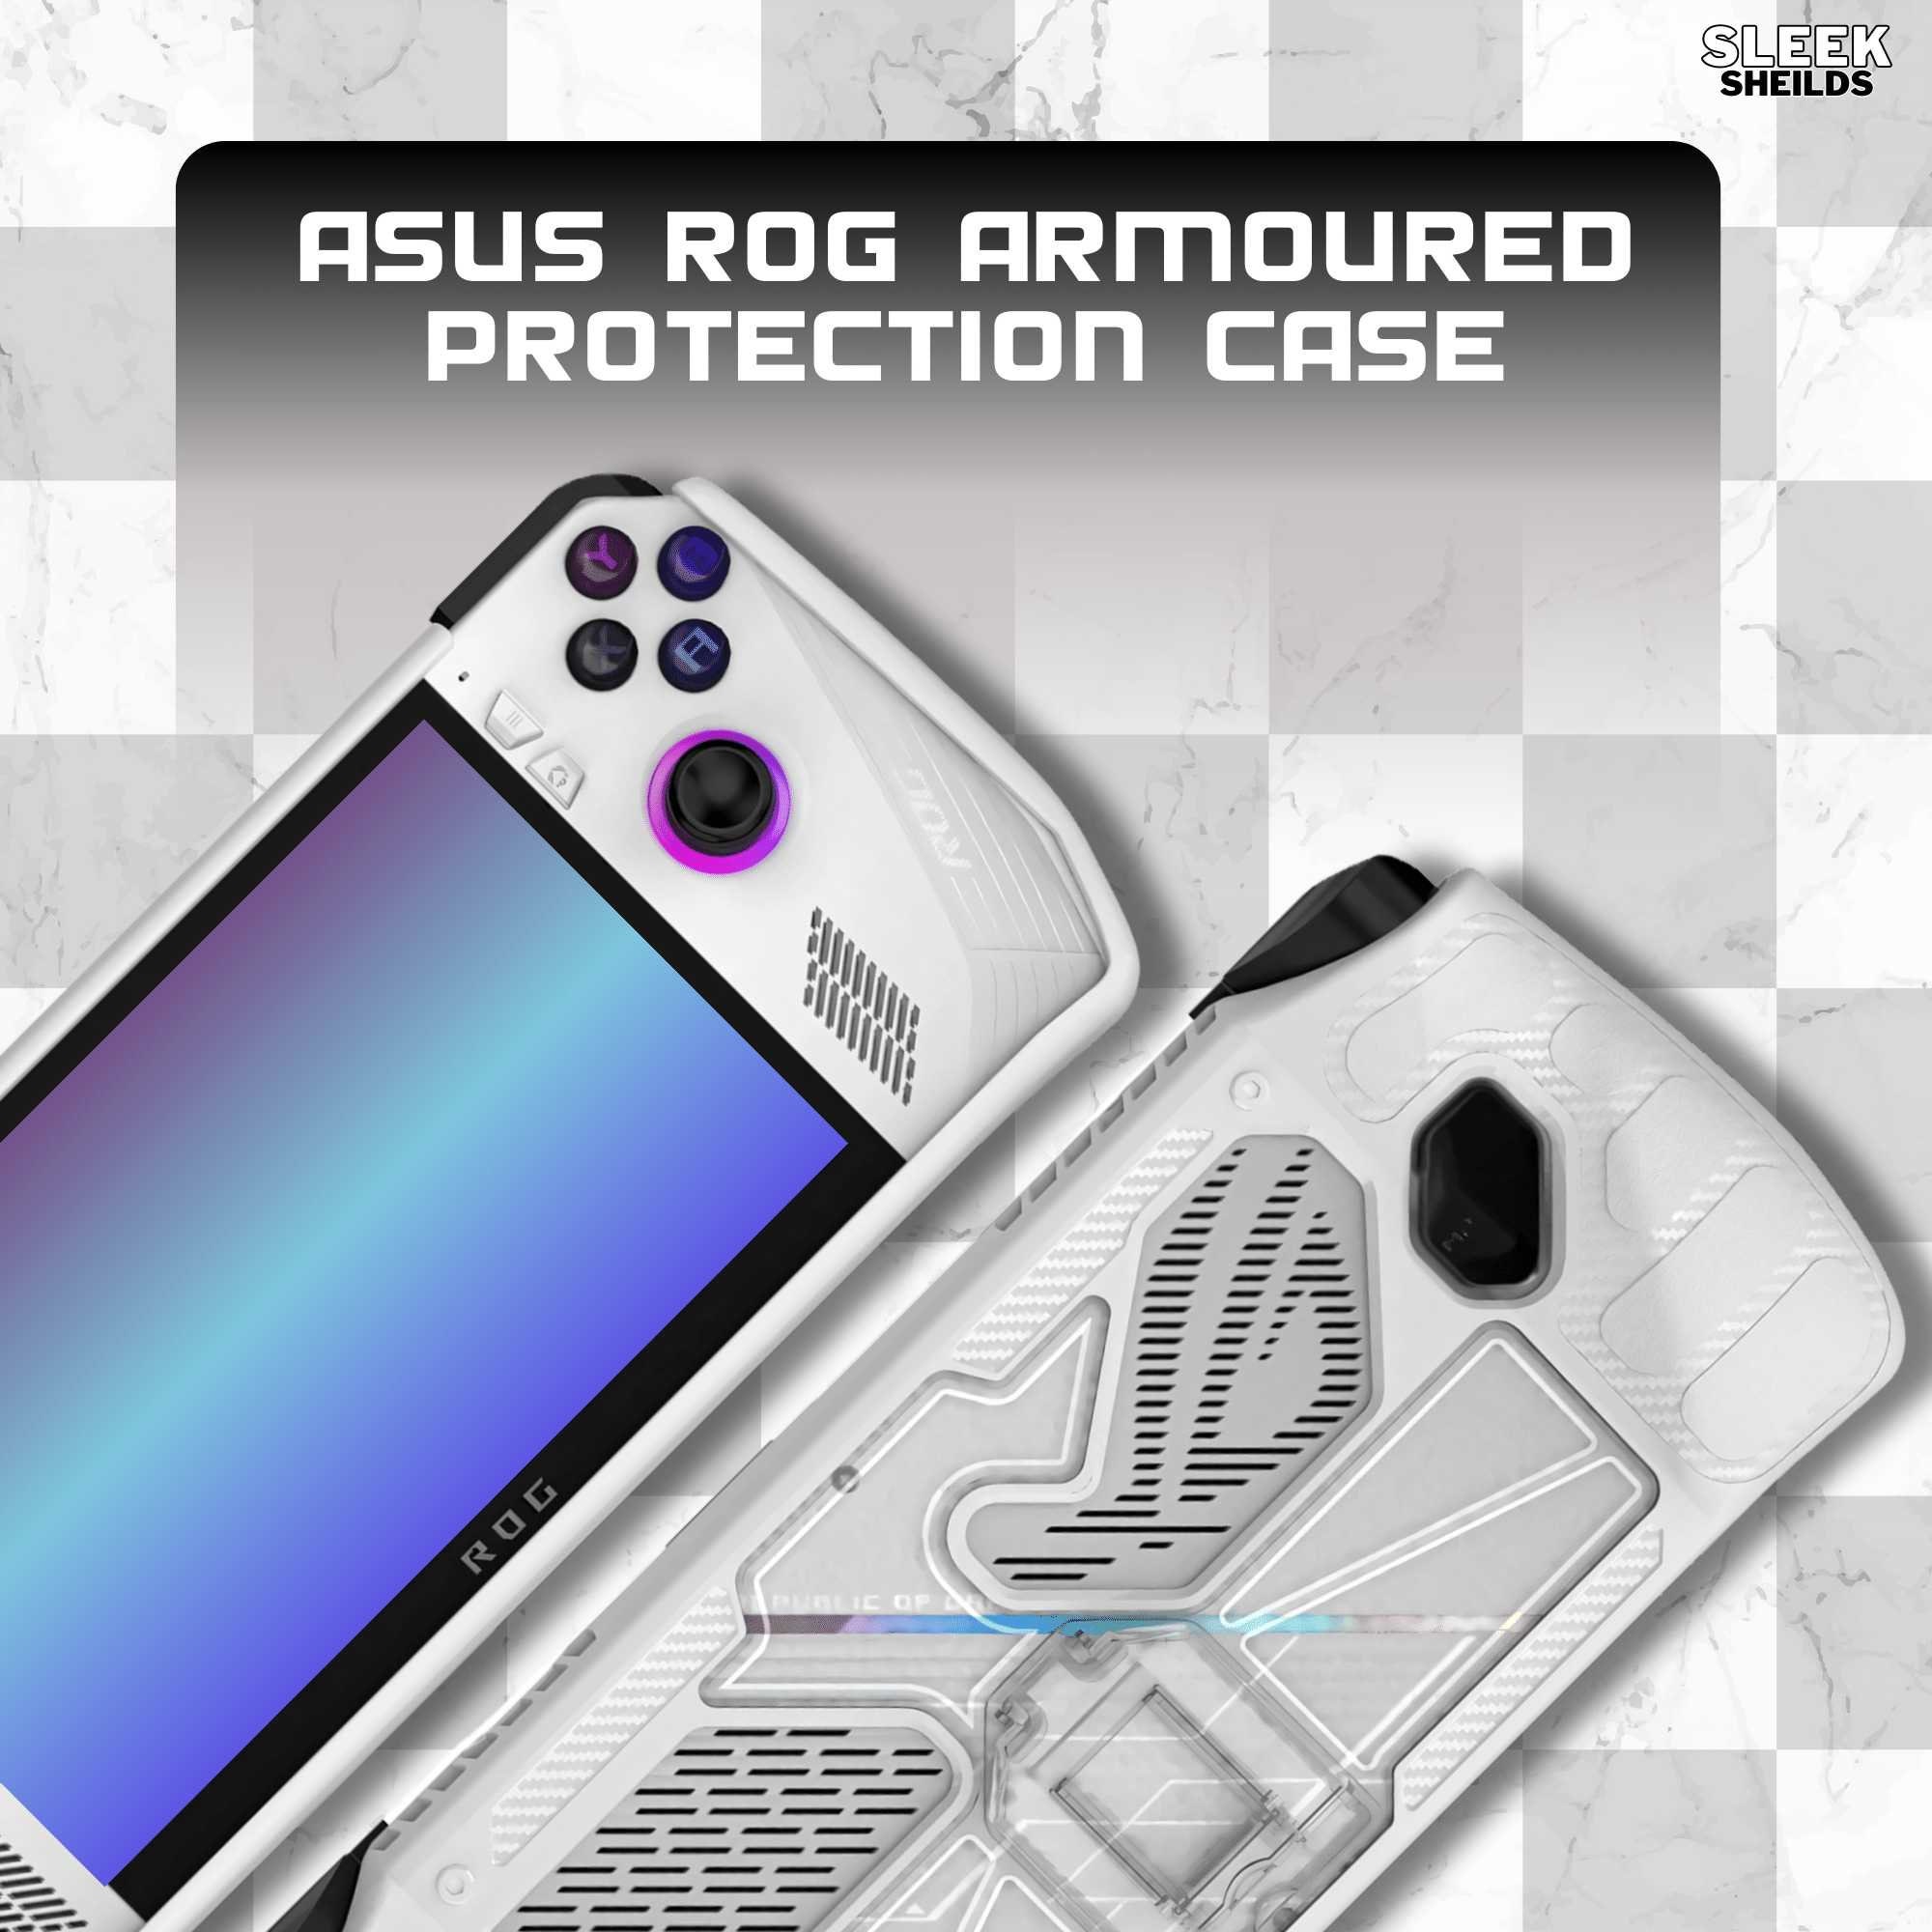 Asus Rog Ally Killswitch protective case🔥🔥🔥🔥 : r/ROGAlly